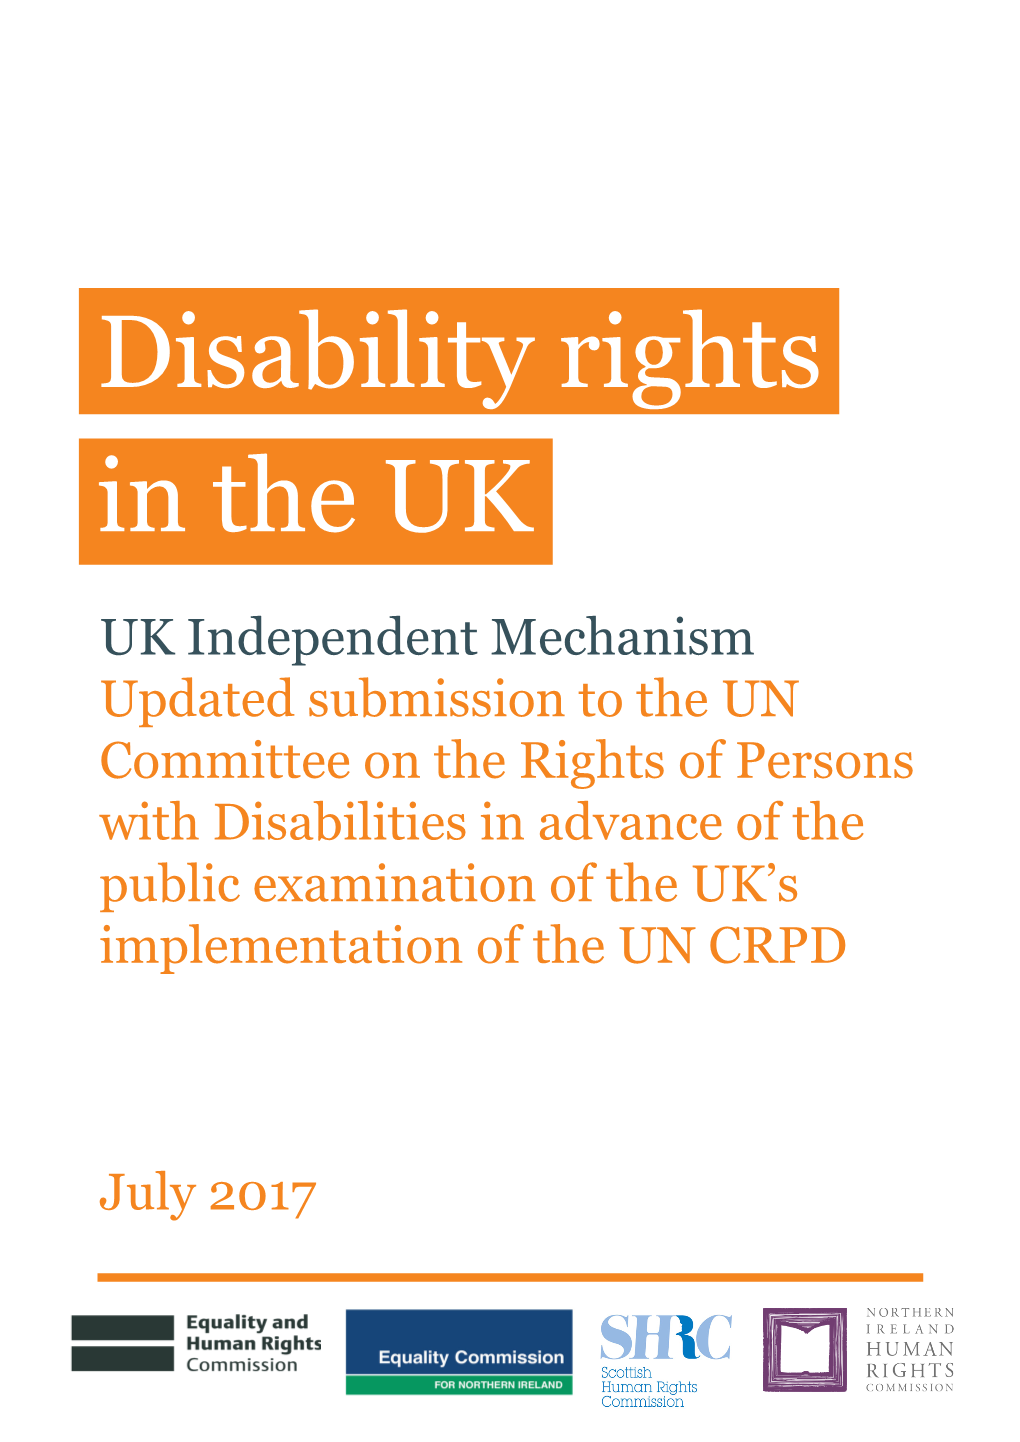 UK Independent Mechanism Updated Submission to the CRPD Committee